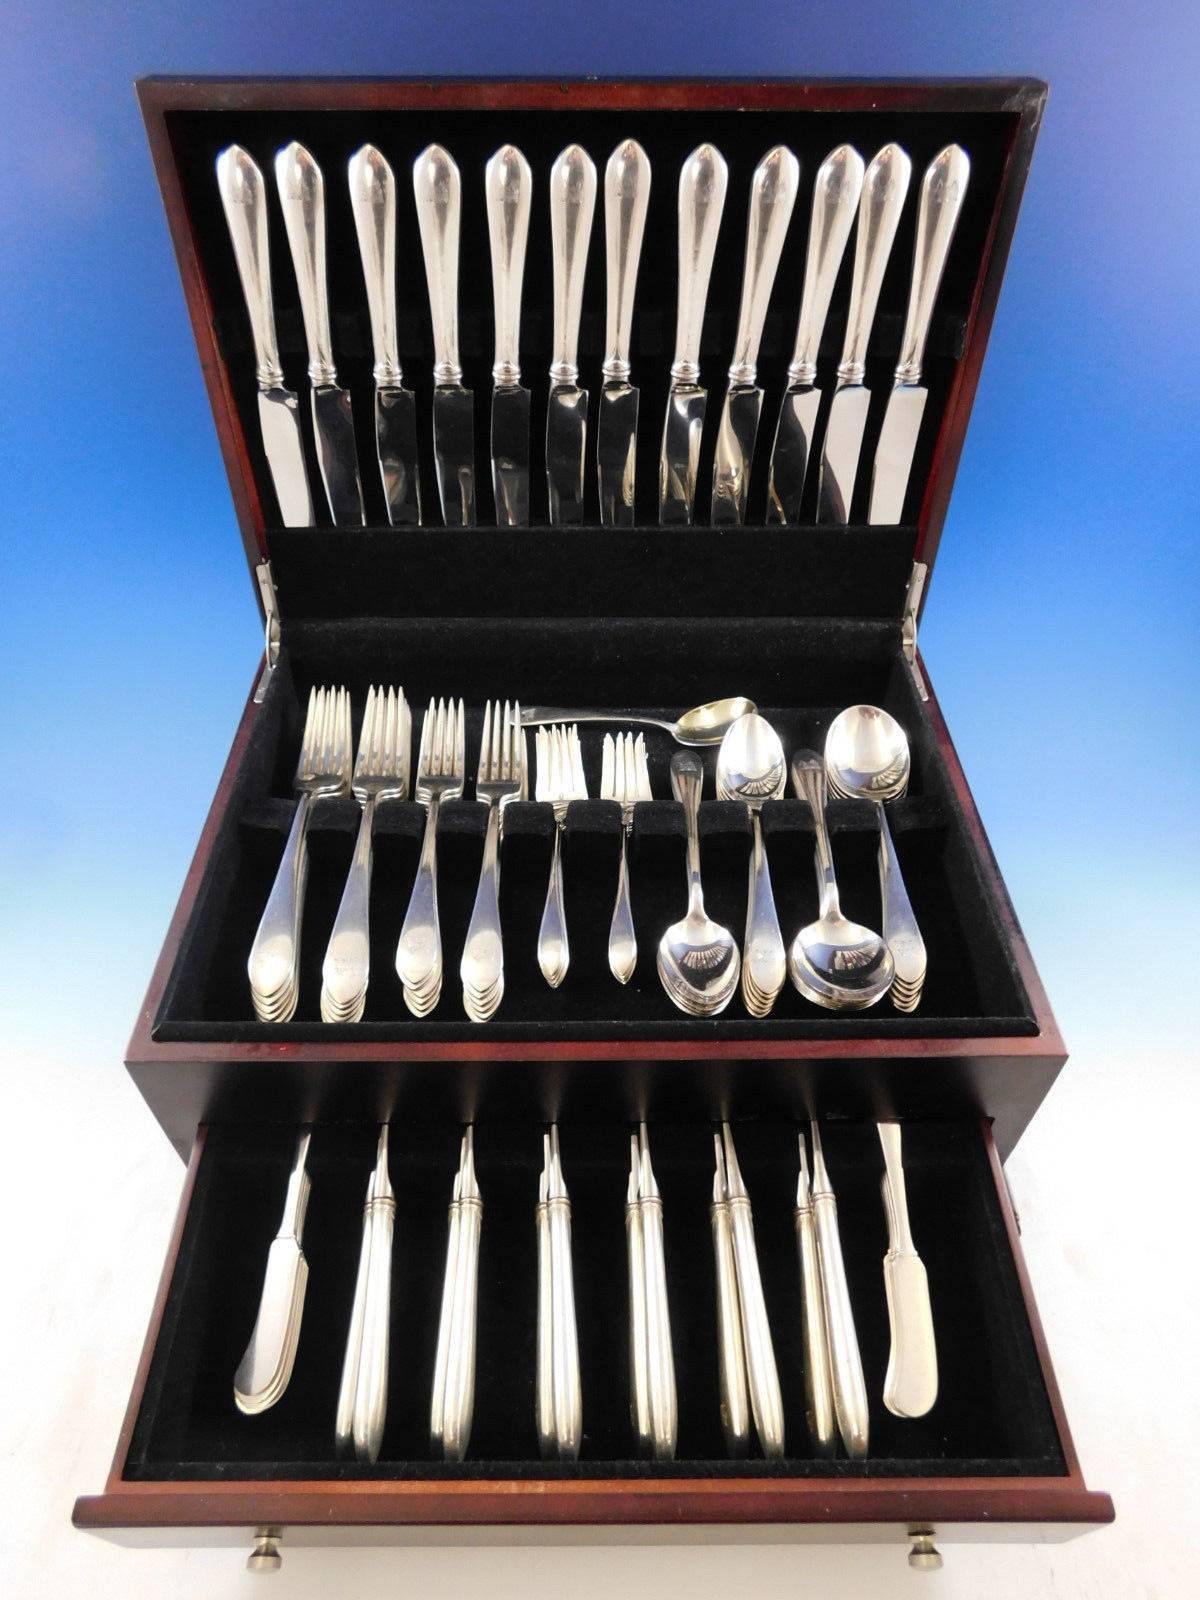 Large Dinner & luncheon Gorham Plain by Gorham sterling silver Flatware set with wild boar crest, 95 pieces. This set includes: 12 Dinner Size Knives, 9 7/8